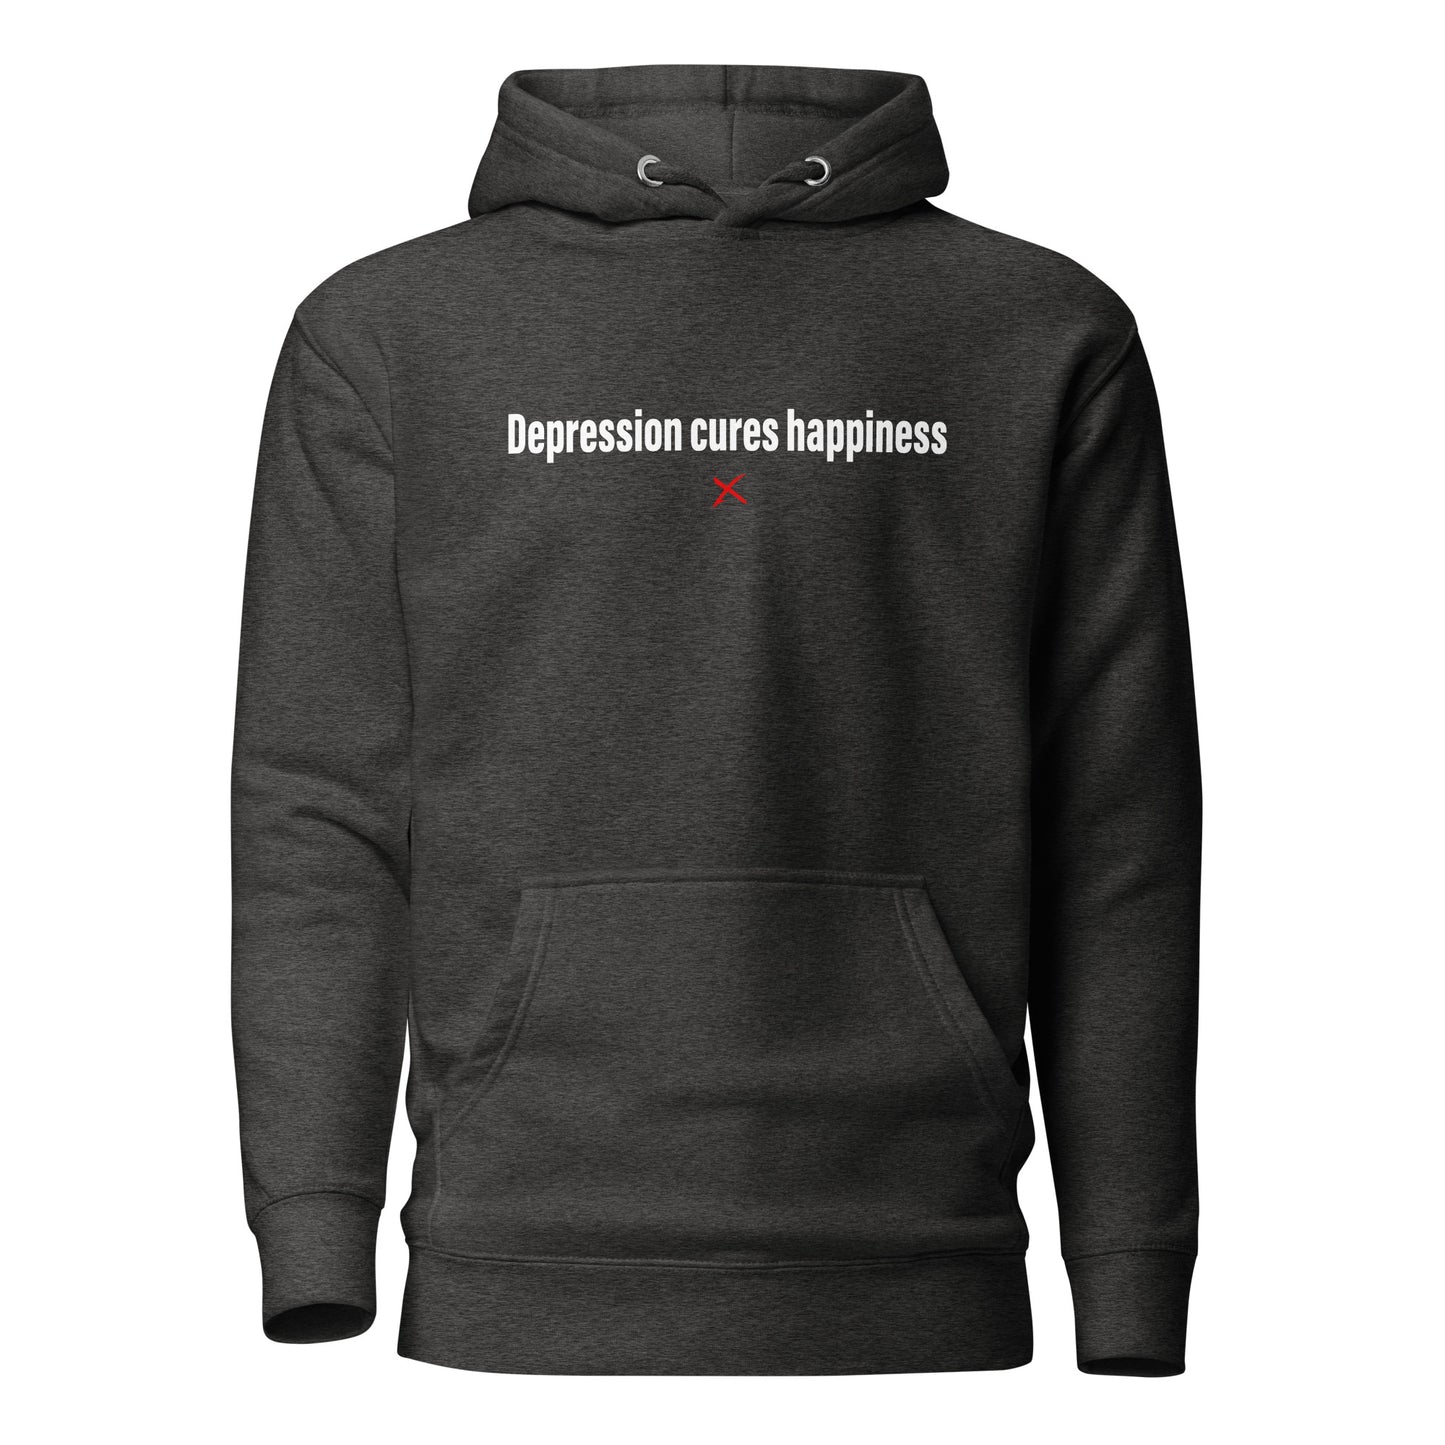 Depression cures happiness - Hoodie